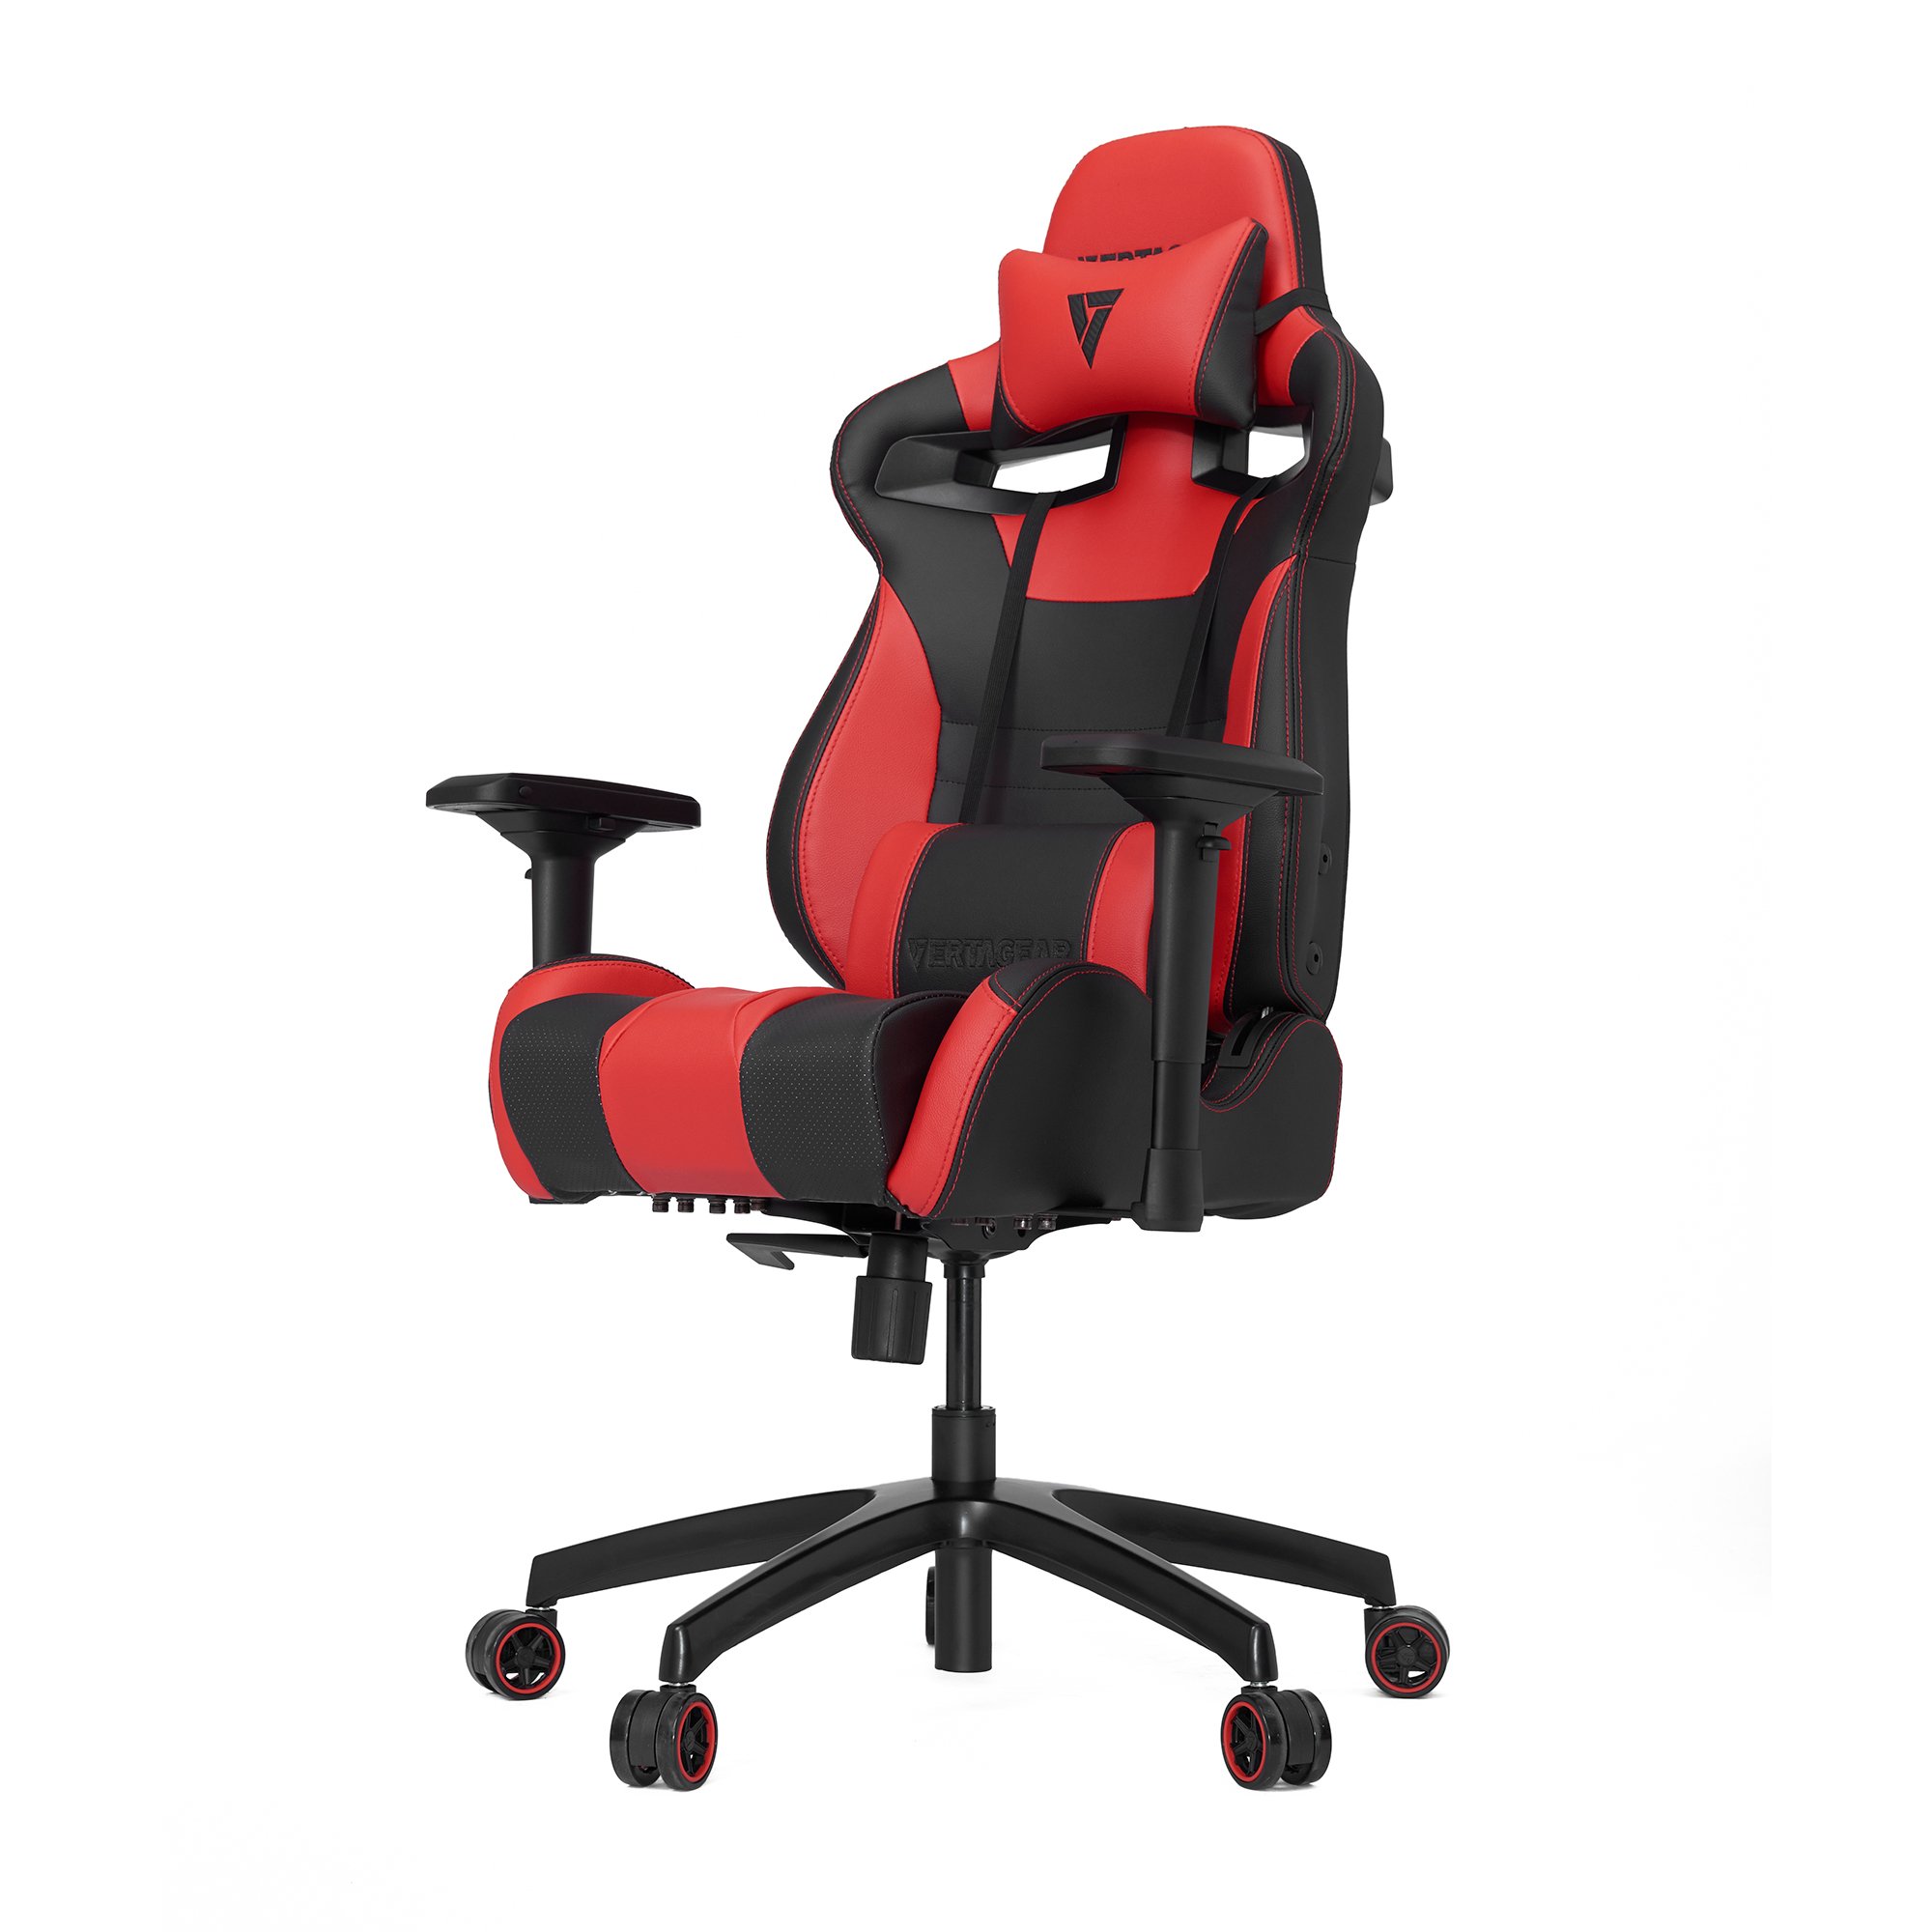 The best racing-style gaming chair | PC Gamer